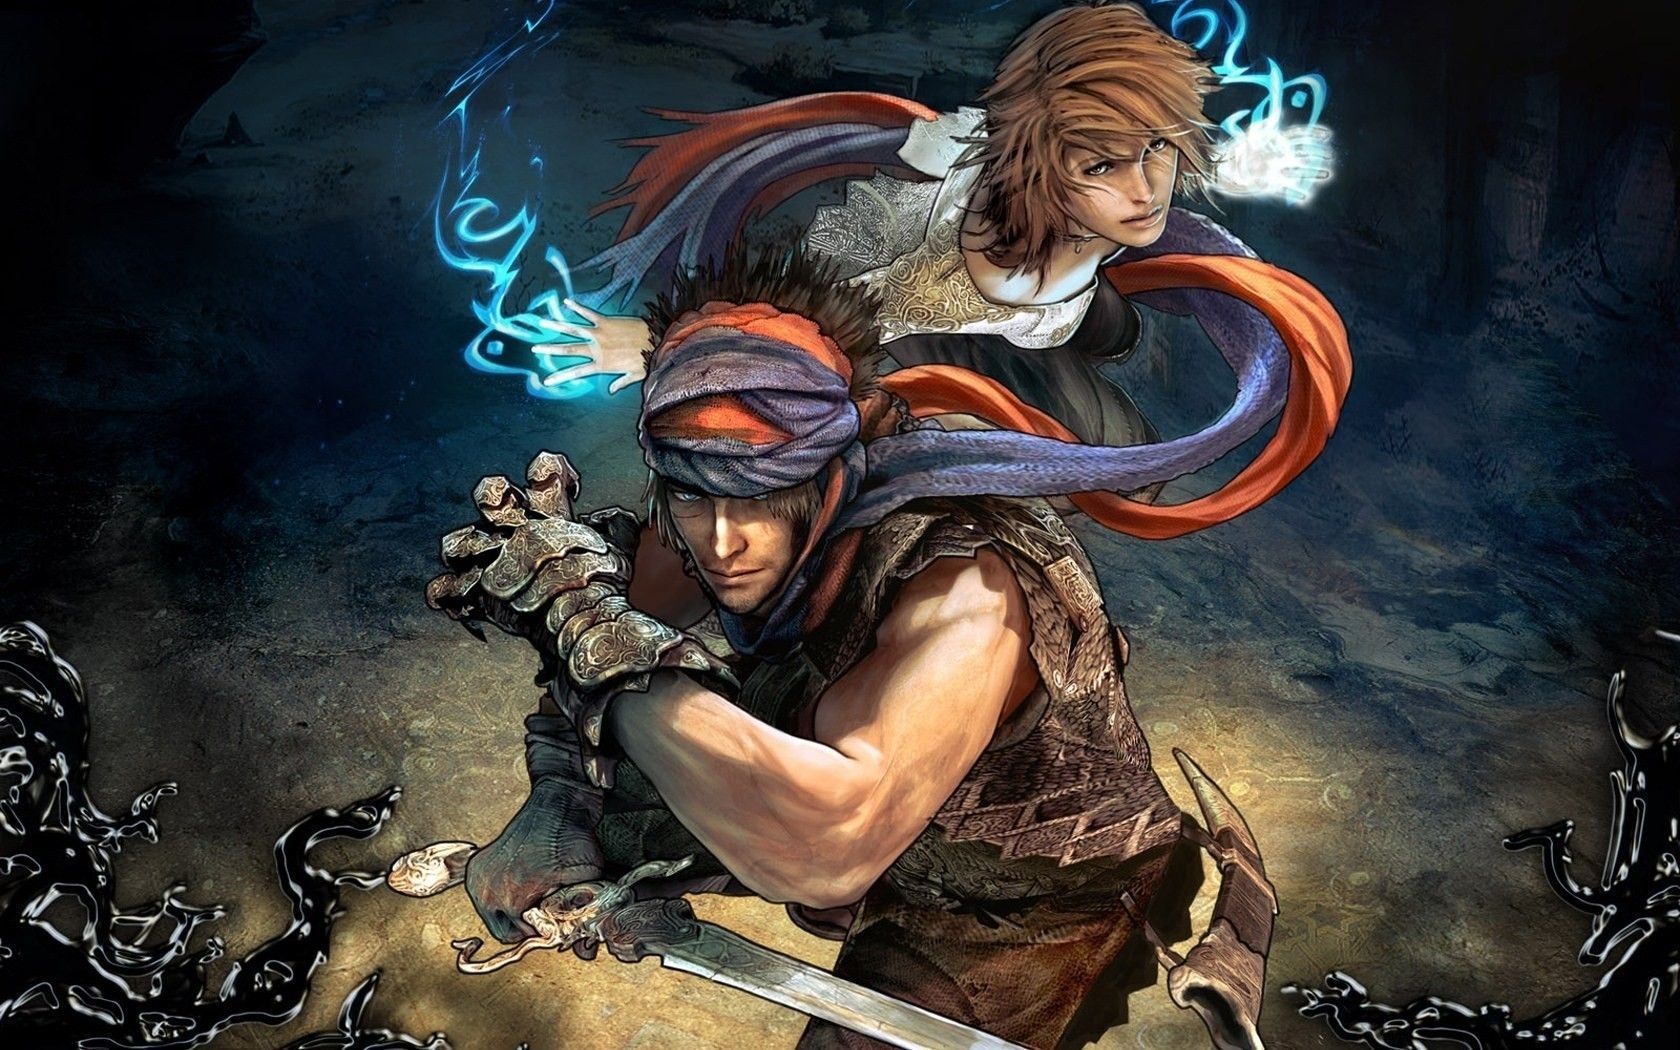 Prince of Persia Action Game HD Backgrounds